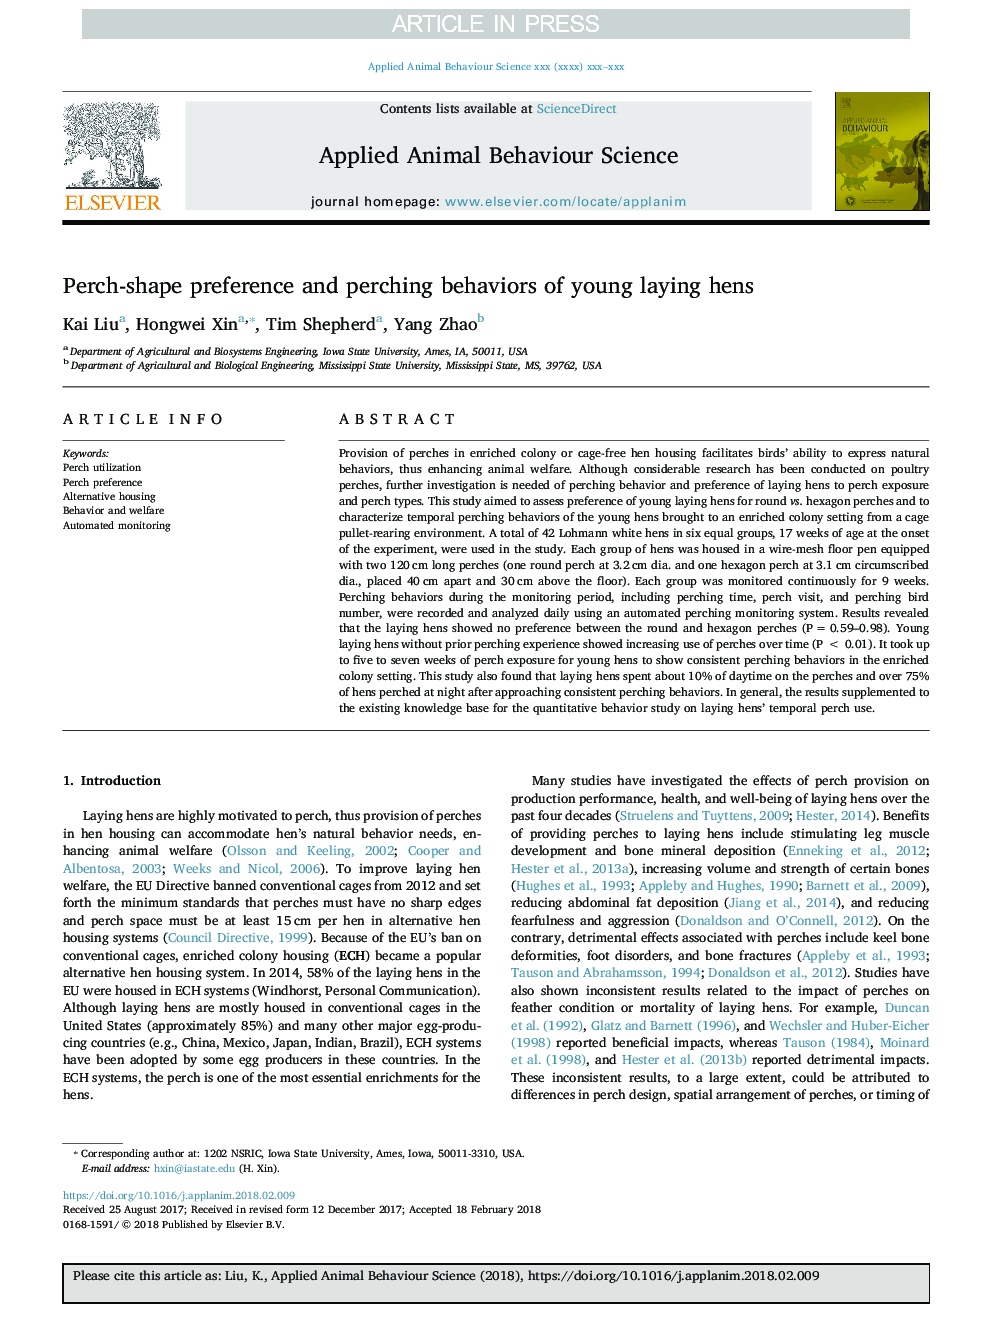 Perch-shape preference and perching behaviors of young laying hens